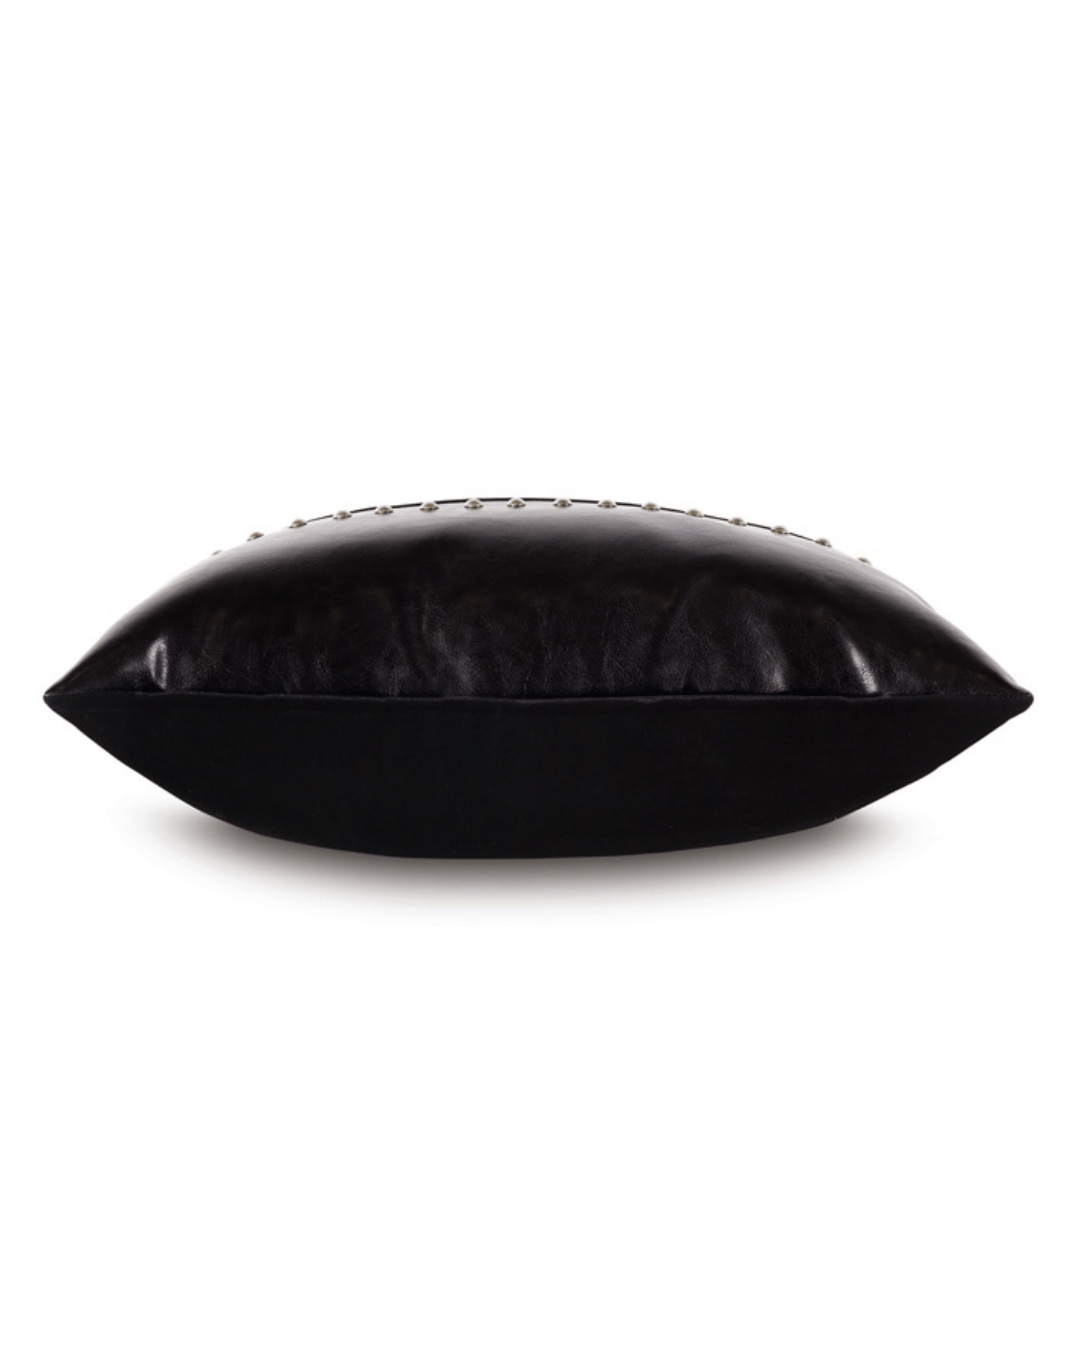 A black leather Nail Licorice Pillow, shaped like a large, flat almond, with stitched details along the edges and a Bungalow style, isolated on a white background by Eastern Accents.